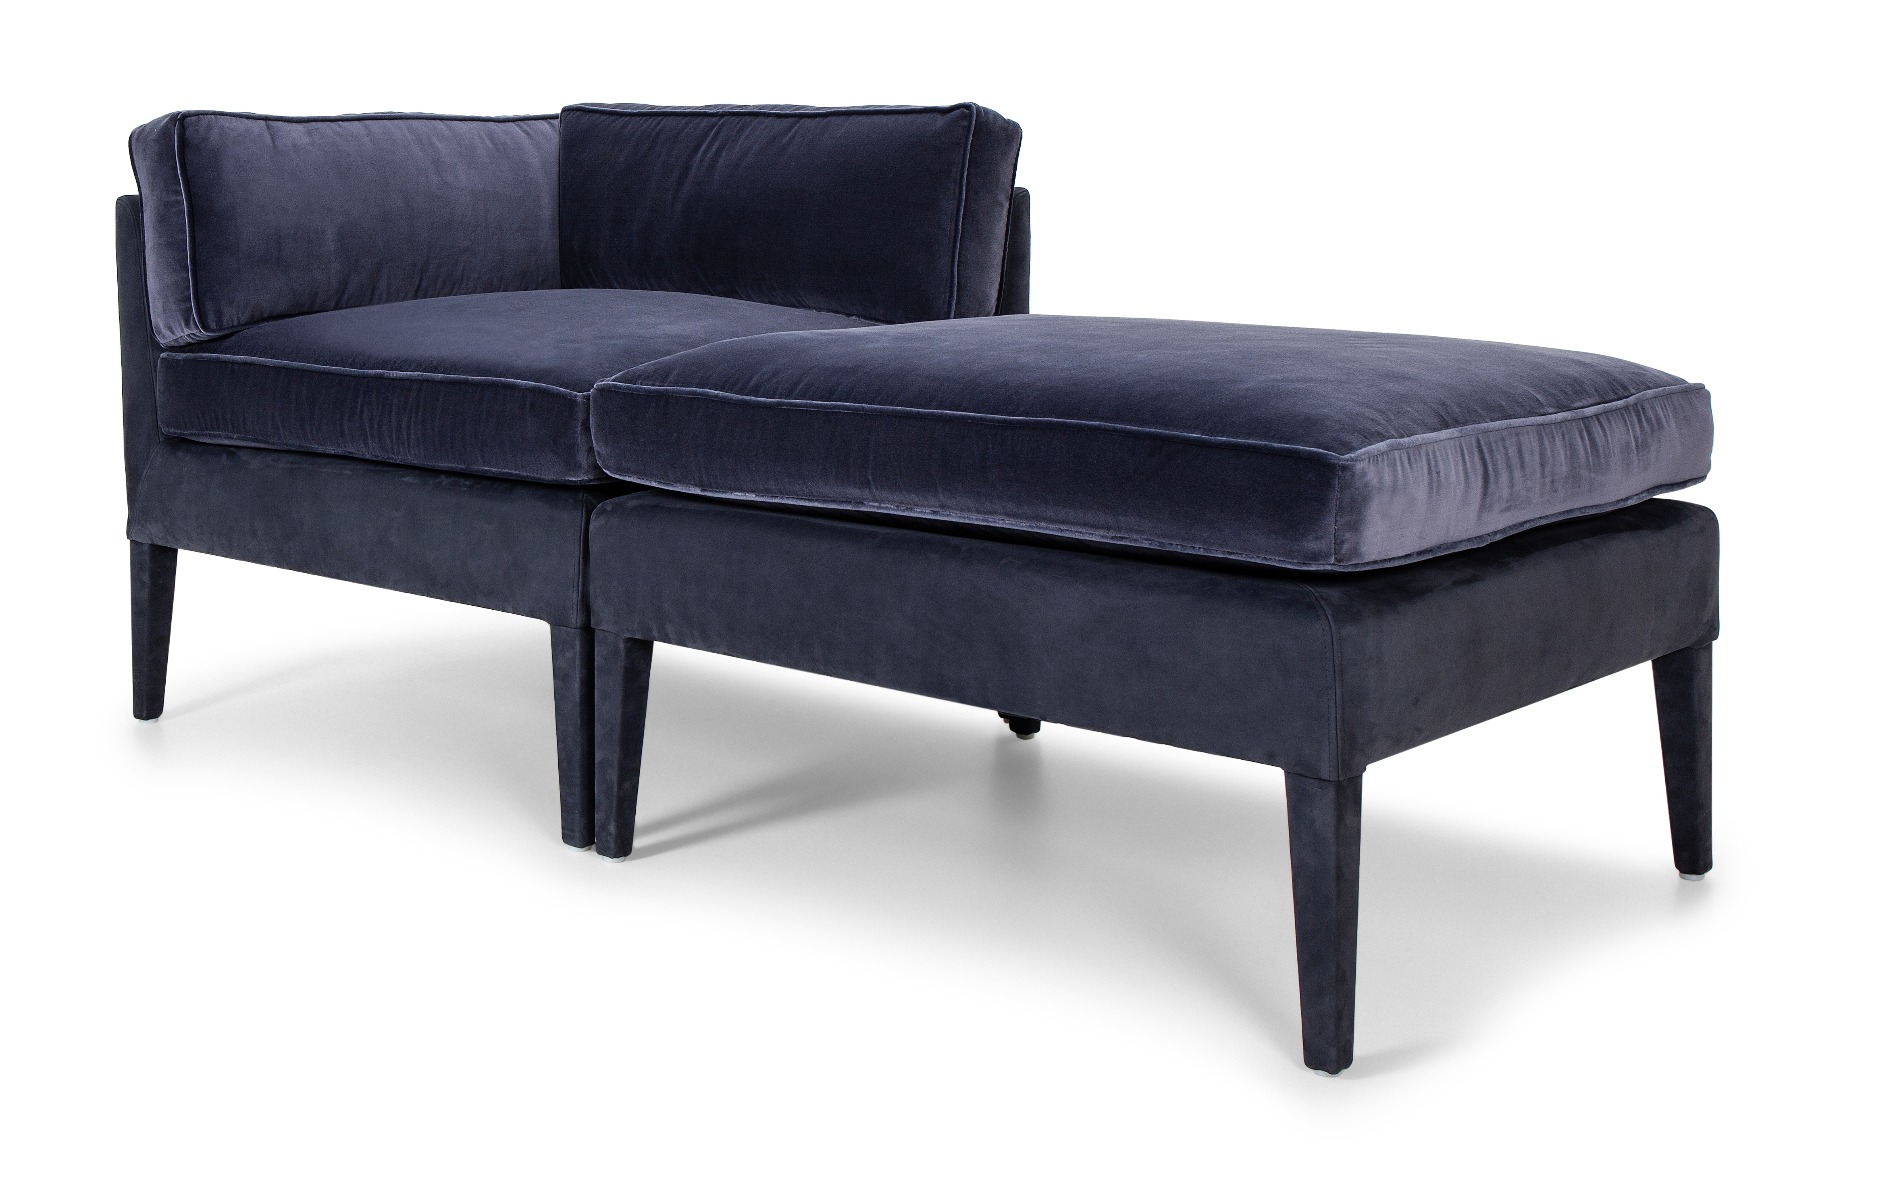 Luxury deep navy Robb Chaise by Luxuria London